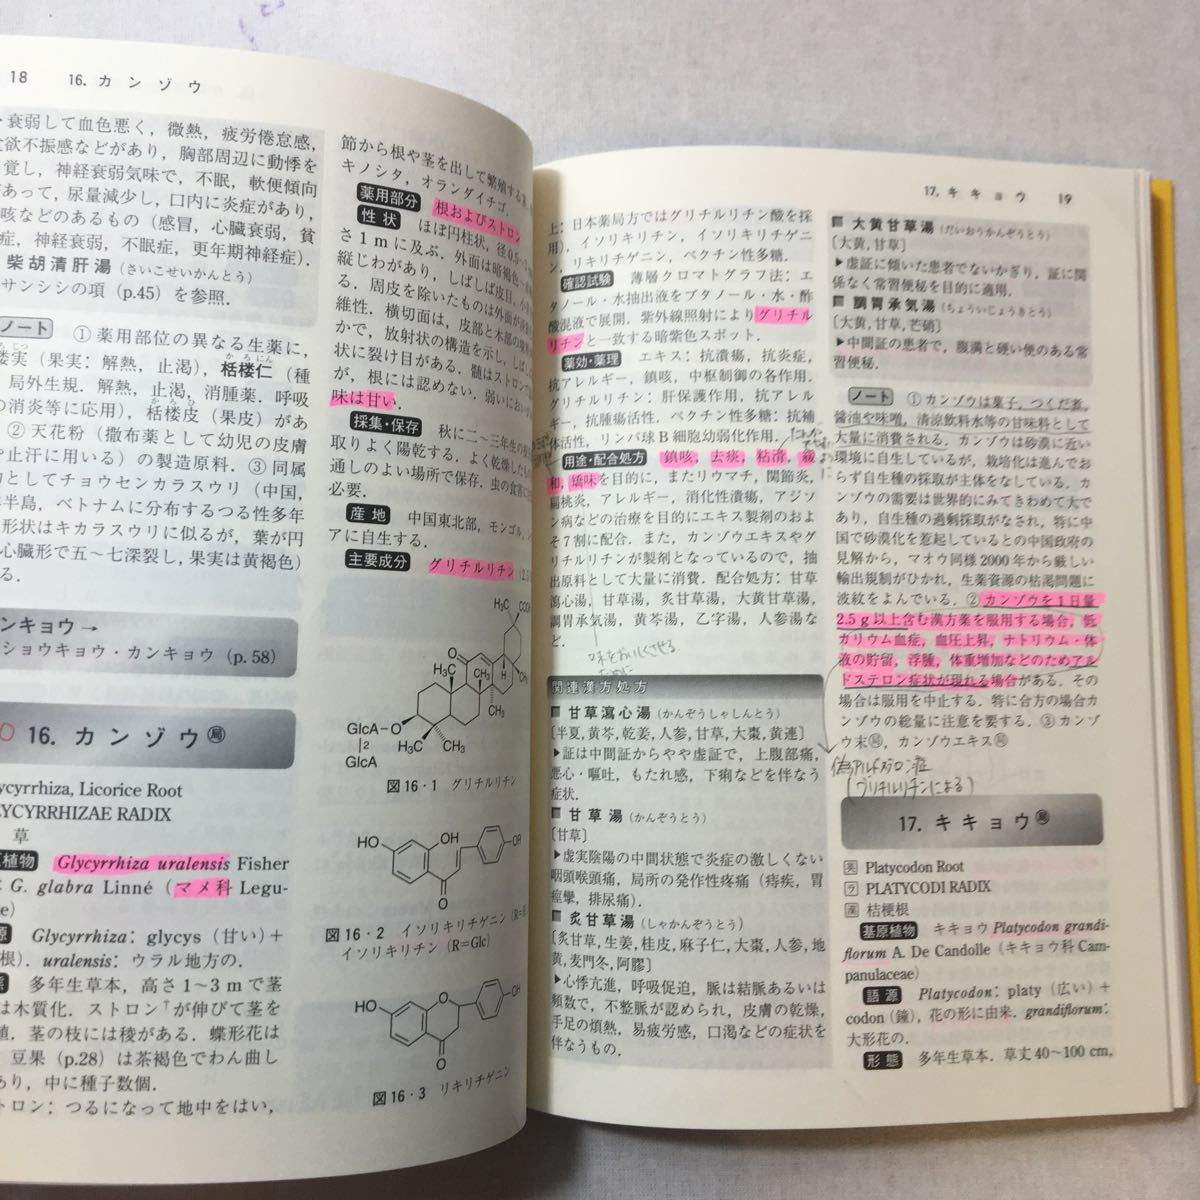 zaa-379! medicine student * pharmacist therefore. ..... want raw medicine 100-.* traditional Chinese medicine place person separate volume 2004/3/1 Japan pharmacology .( editing ) peace rice field 